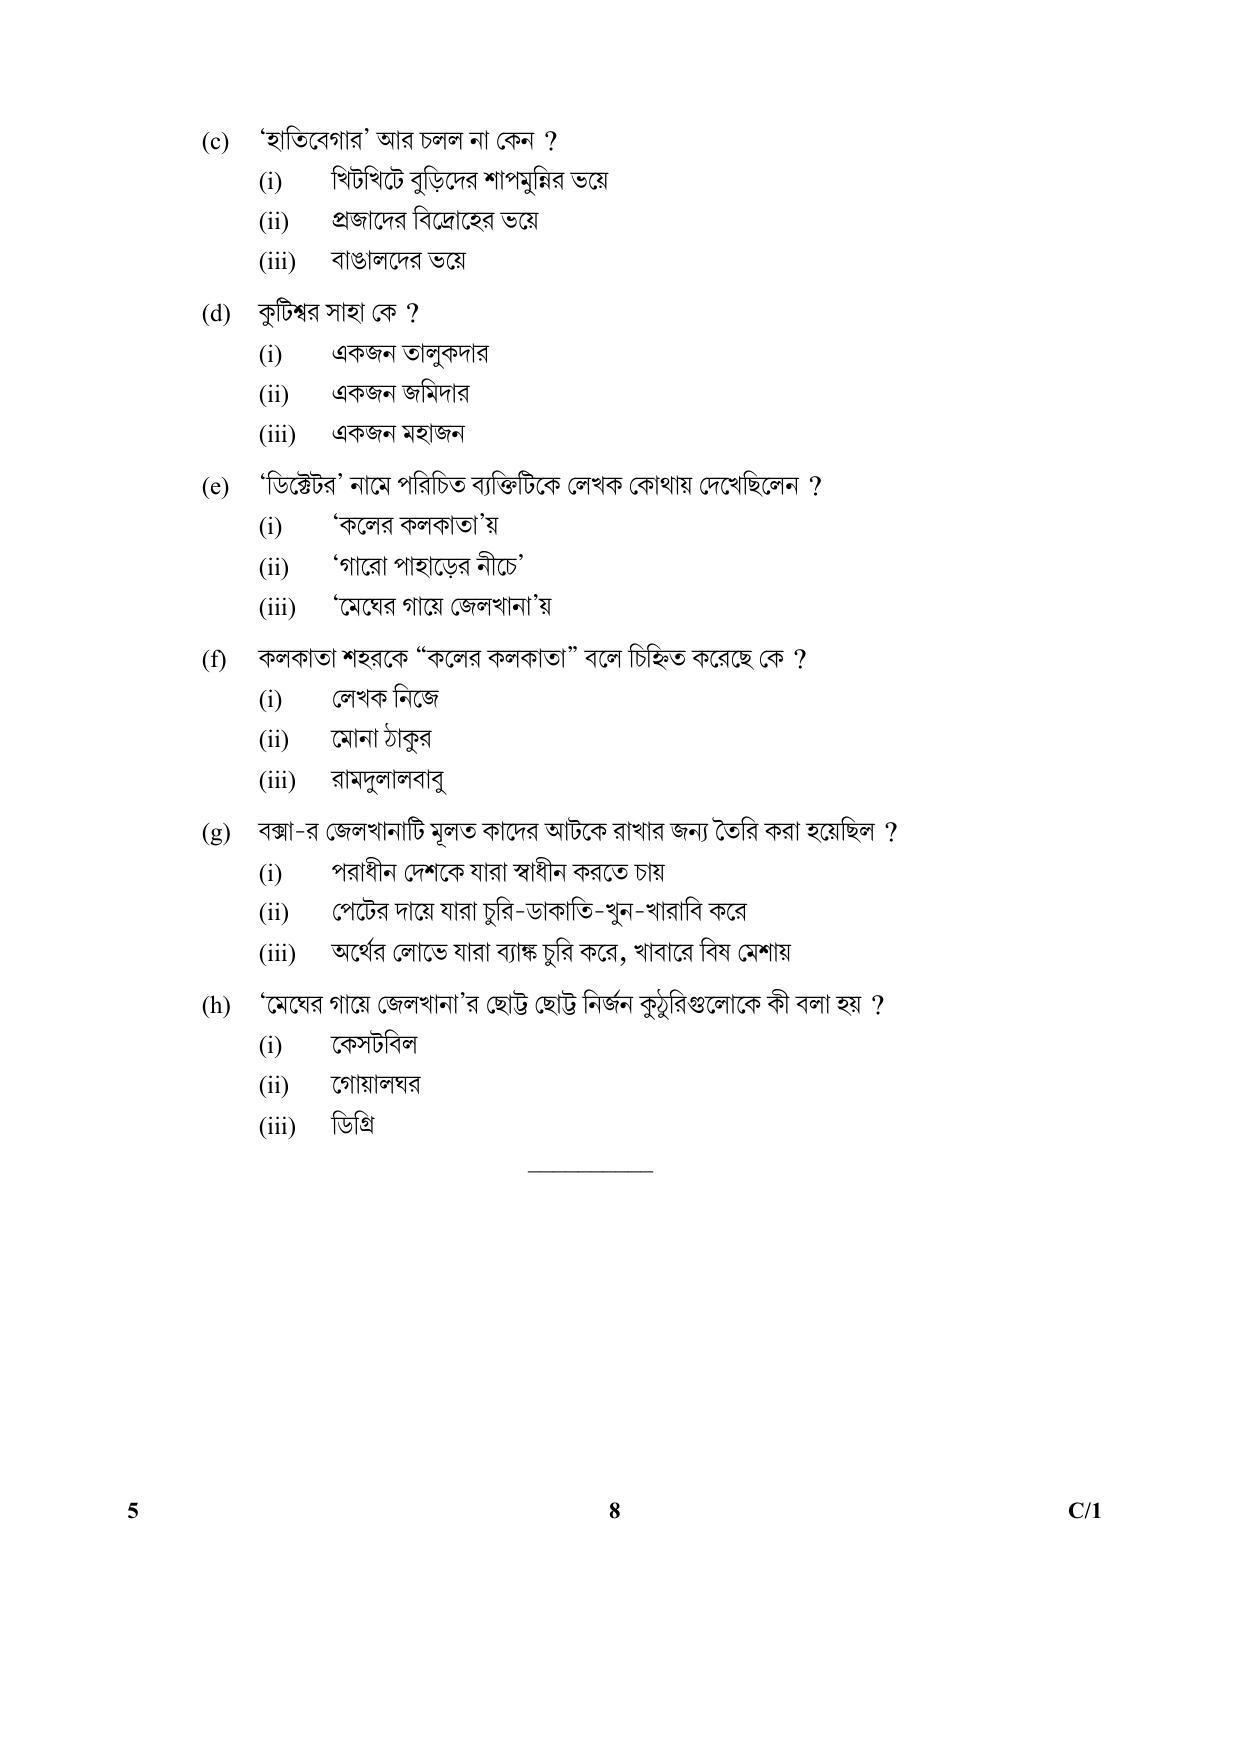 CBSE Class 12 5 (Bengali) 2018 Compartment Question Paper - Page 8